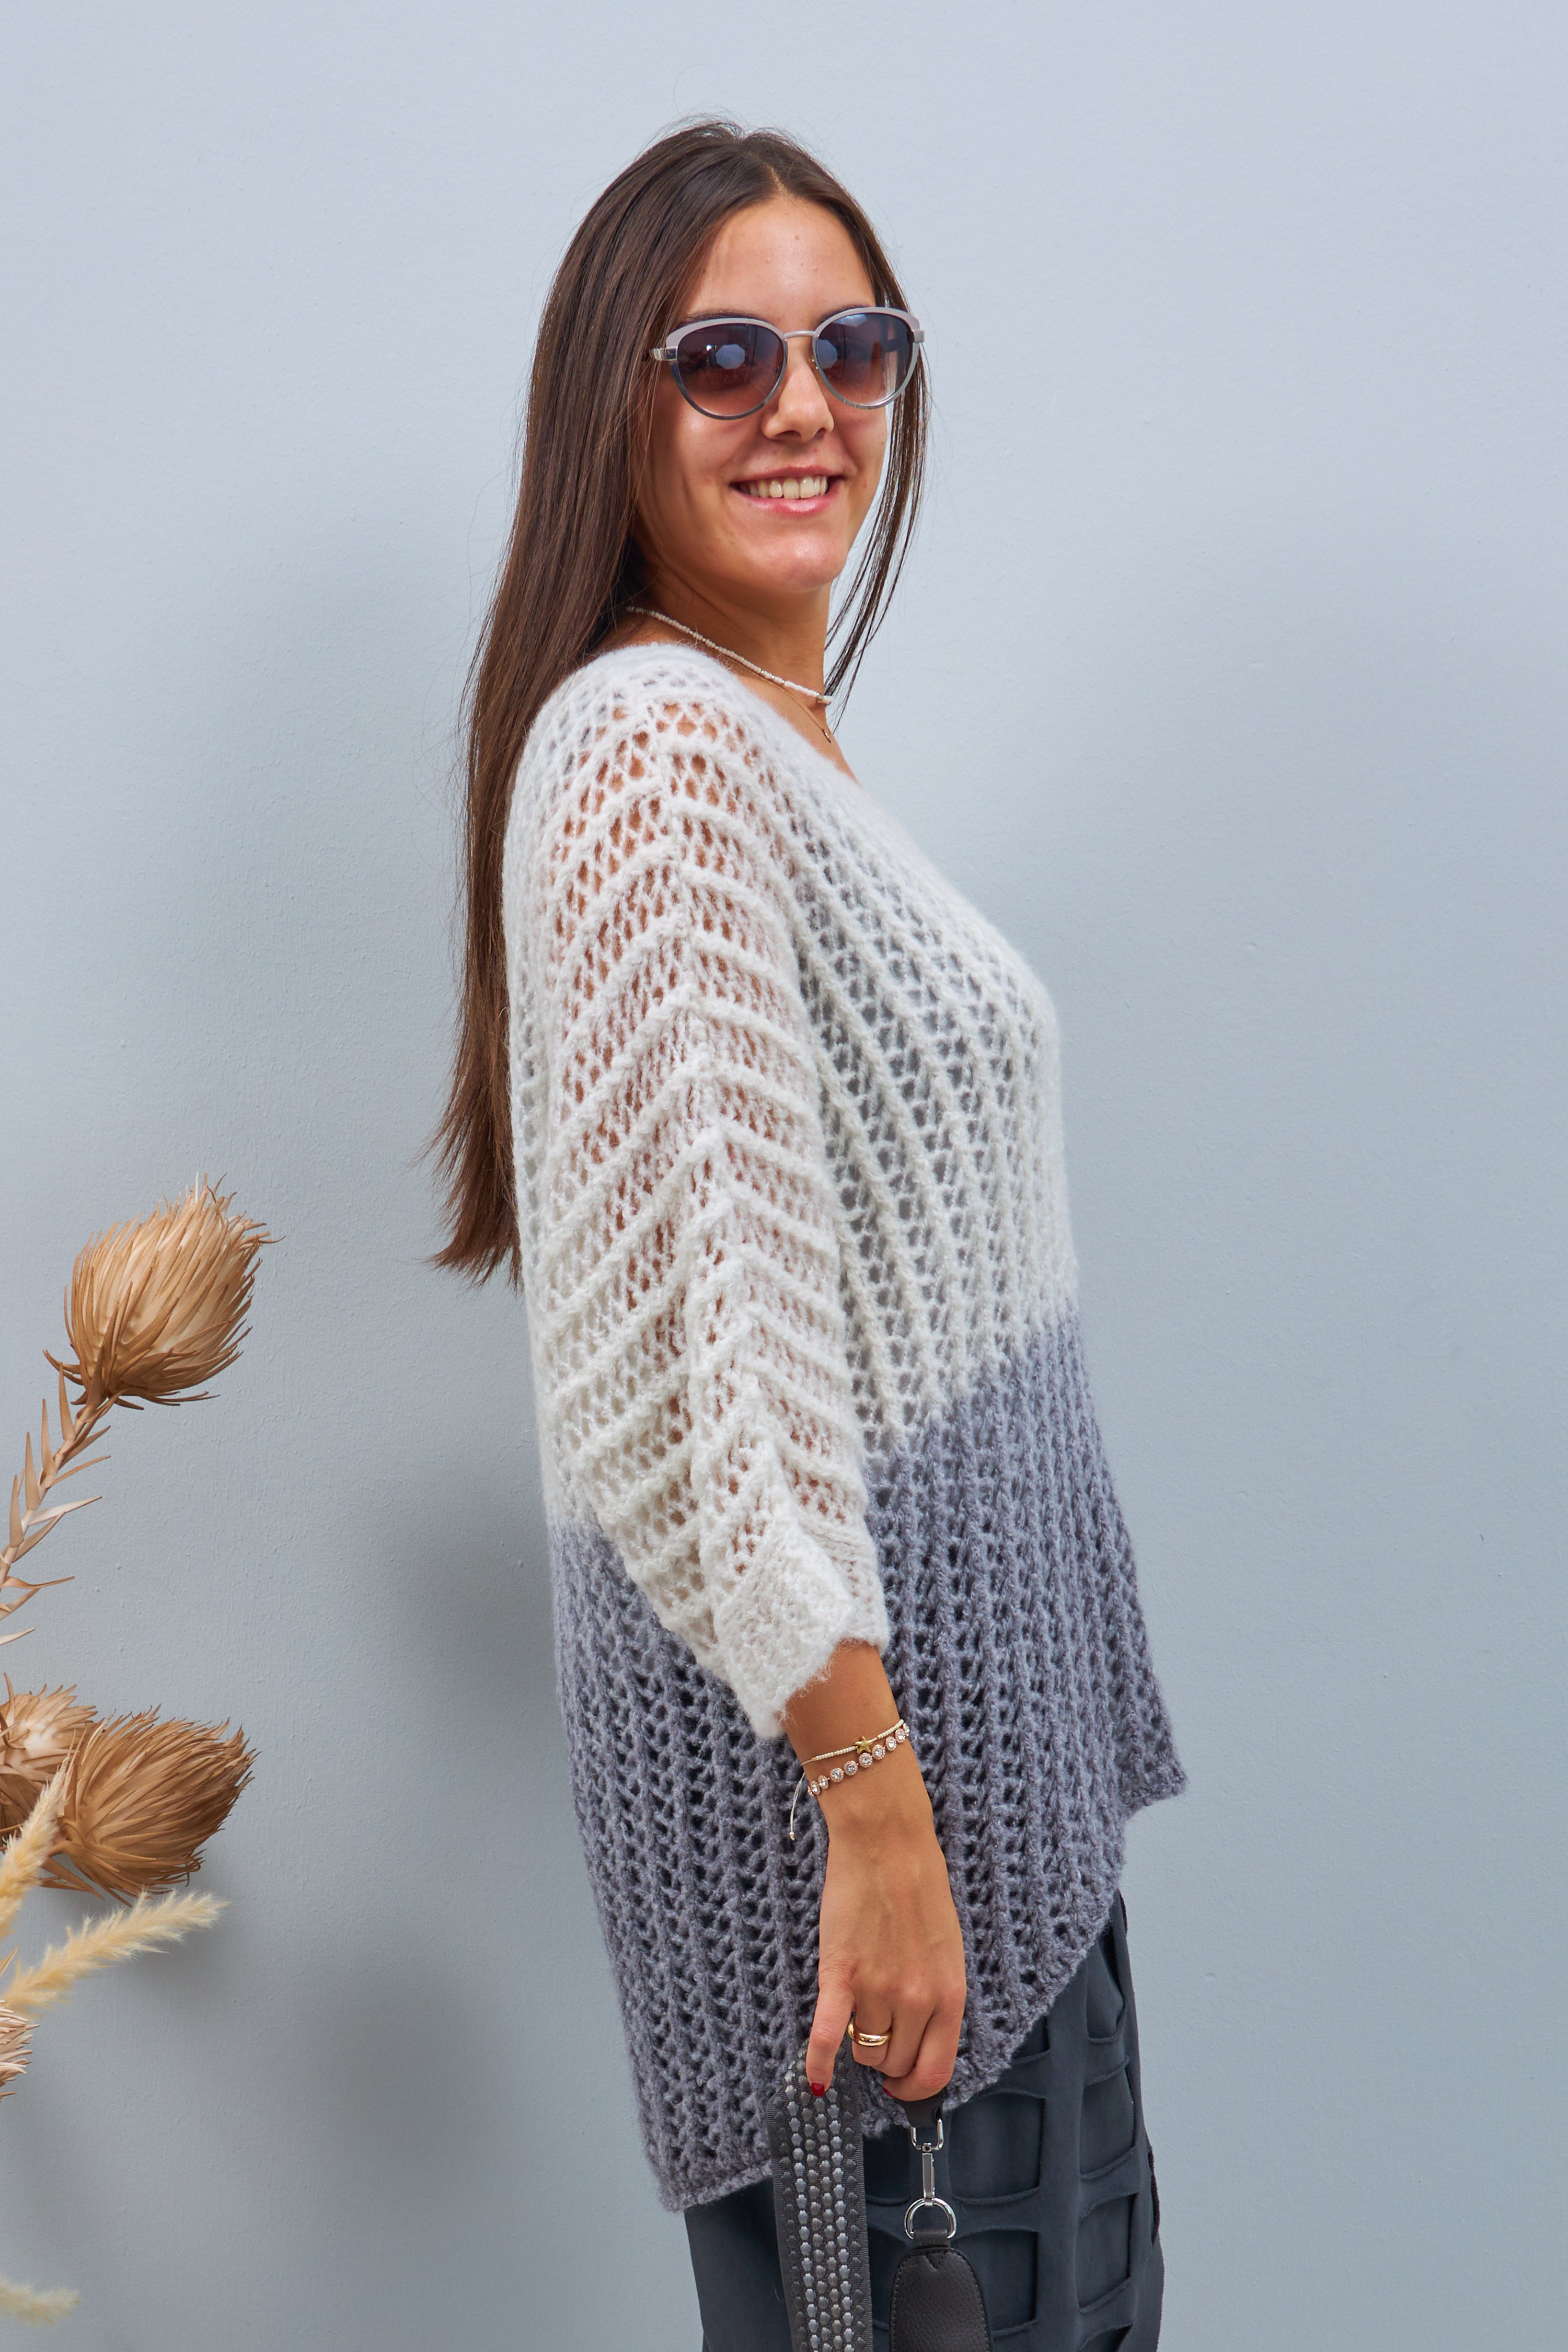 Knit sweater with color gradient, offwhite-grey